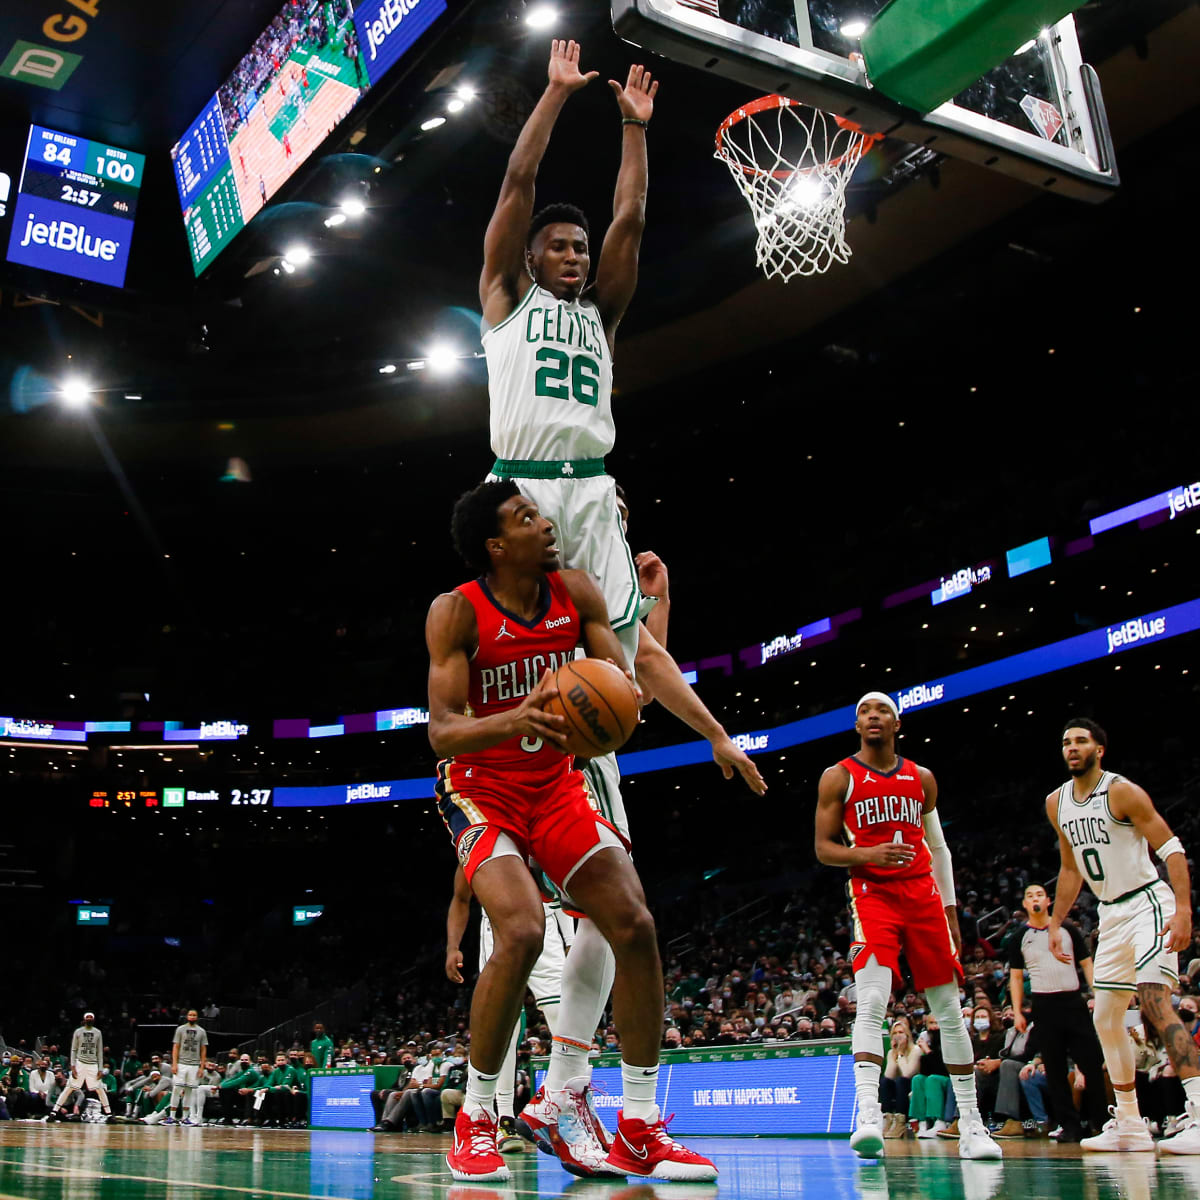 Celtics Injuries: Aaron Nesmith Still Out With Ankle Sprain Vs